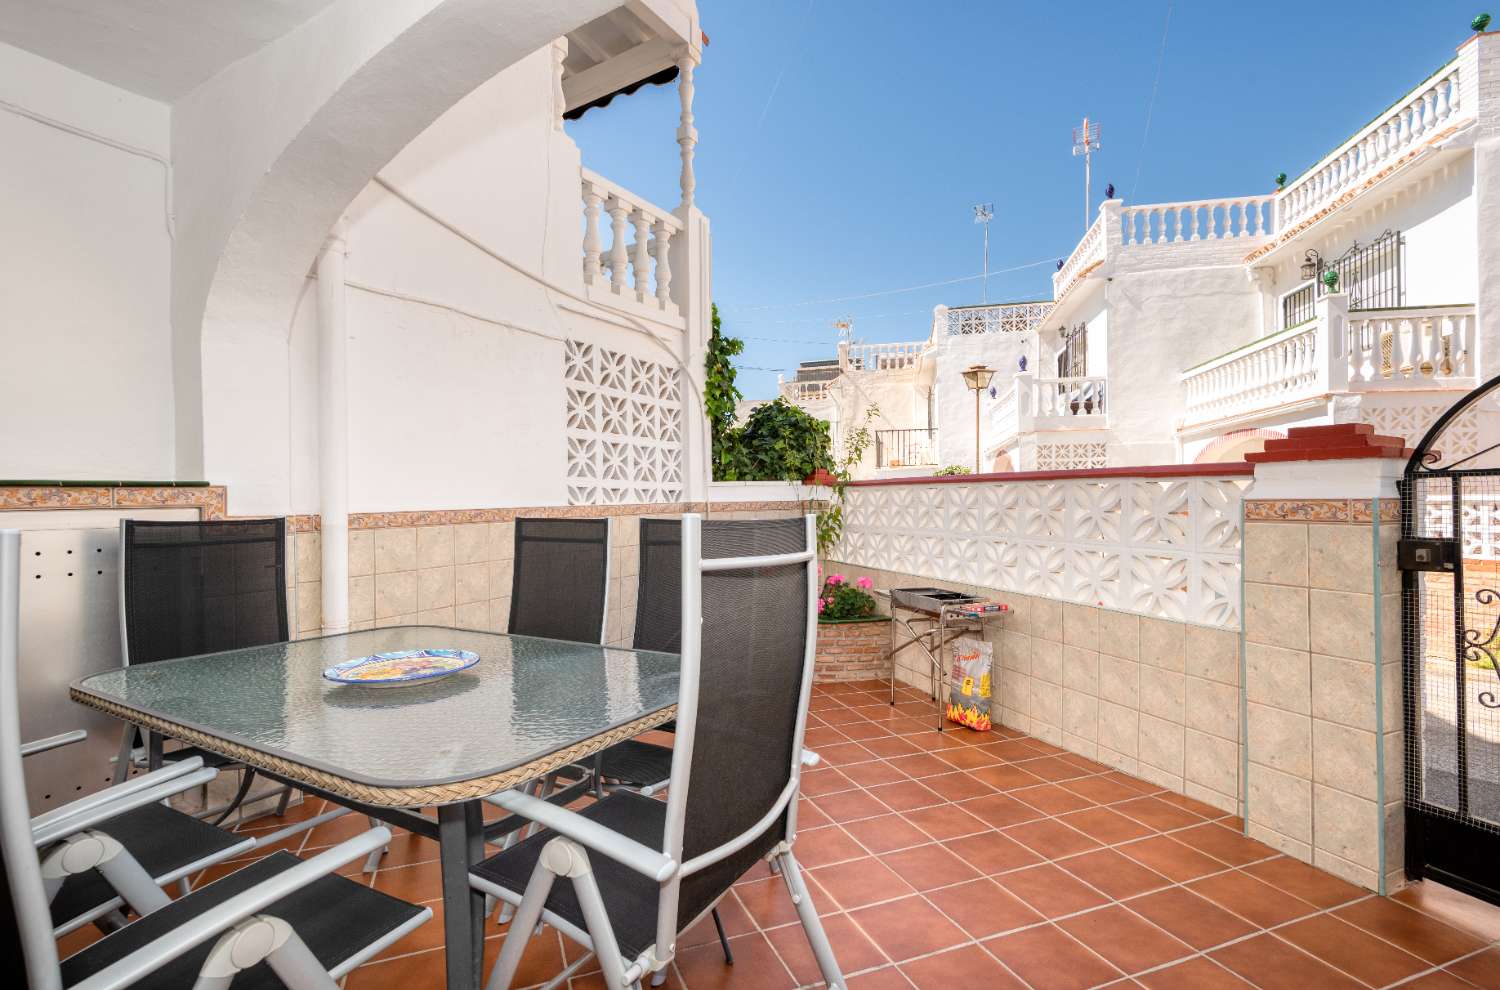 House for sale in Nerja, Torrecilla beach area.